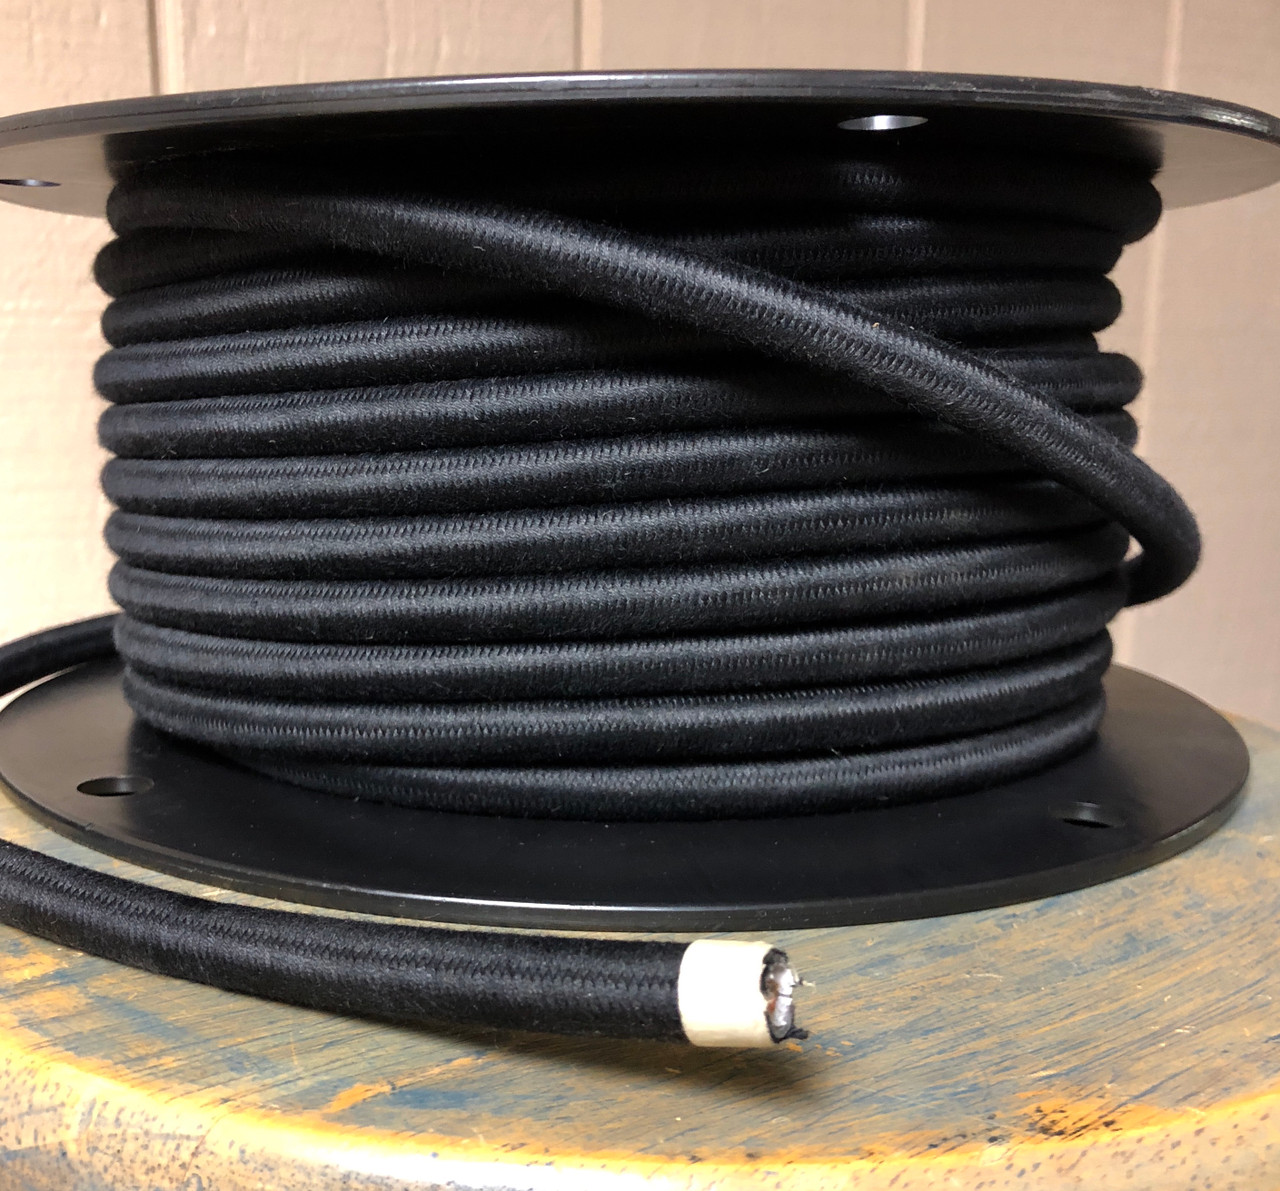 Black 14-Gauge Round Cloth Covered 3-Wire Cord, Cotton - PER FOOT